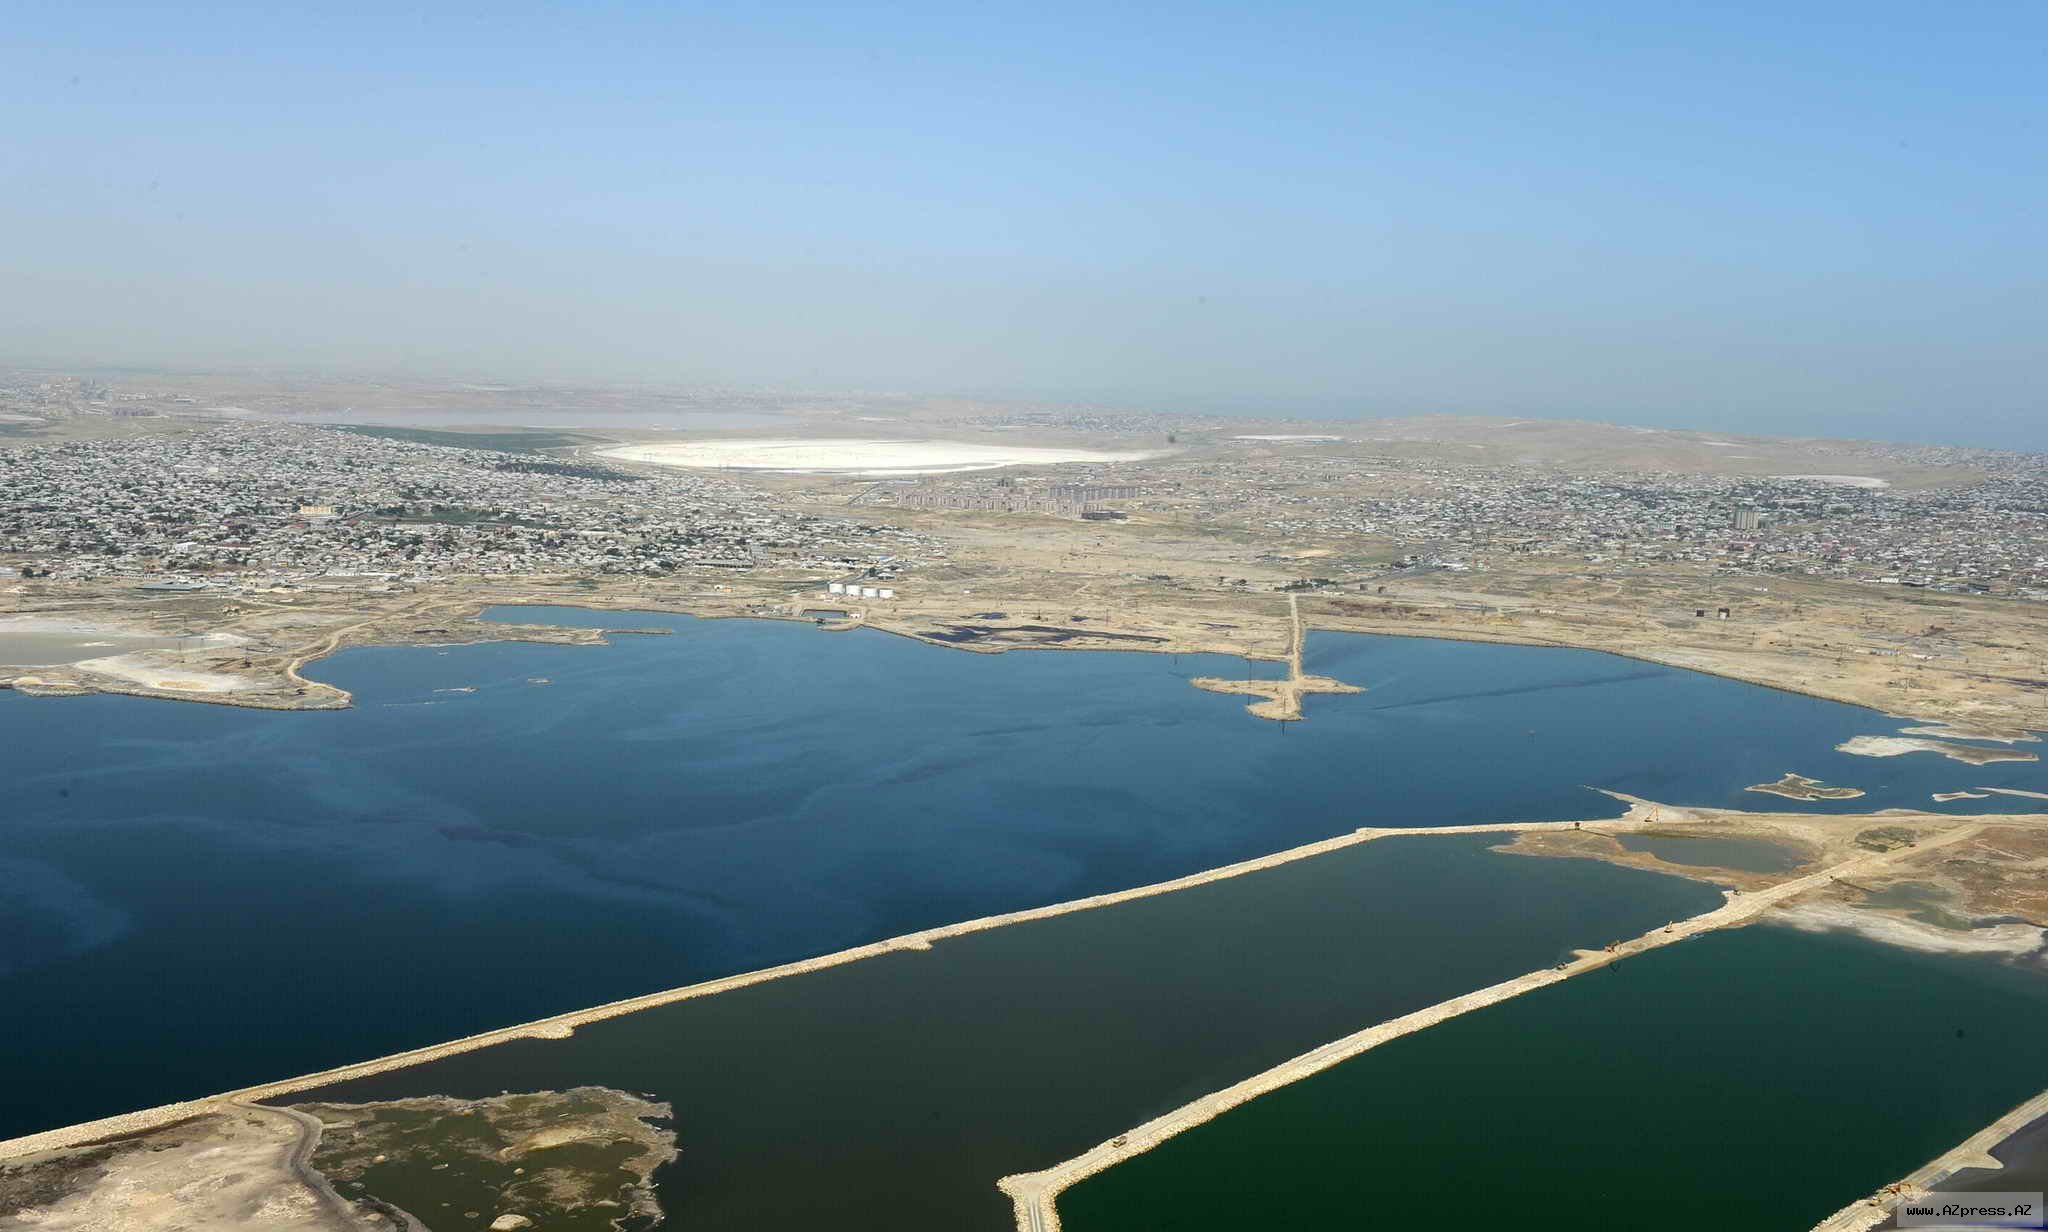 Absheron's largest lake to be restored by 2020